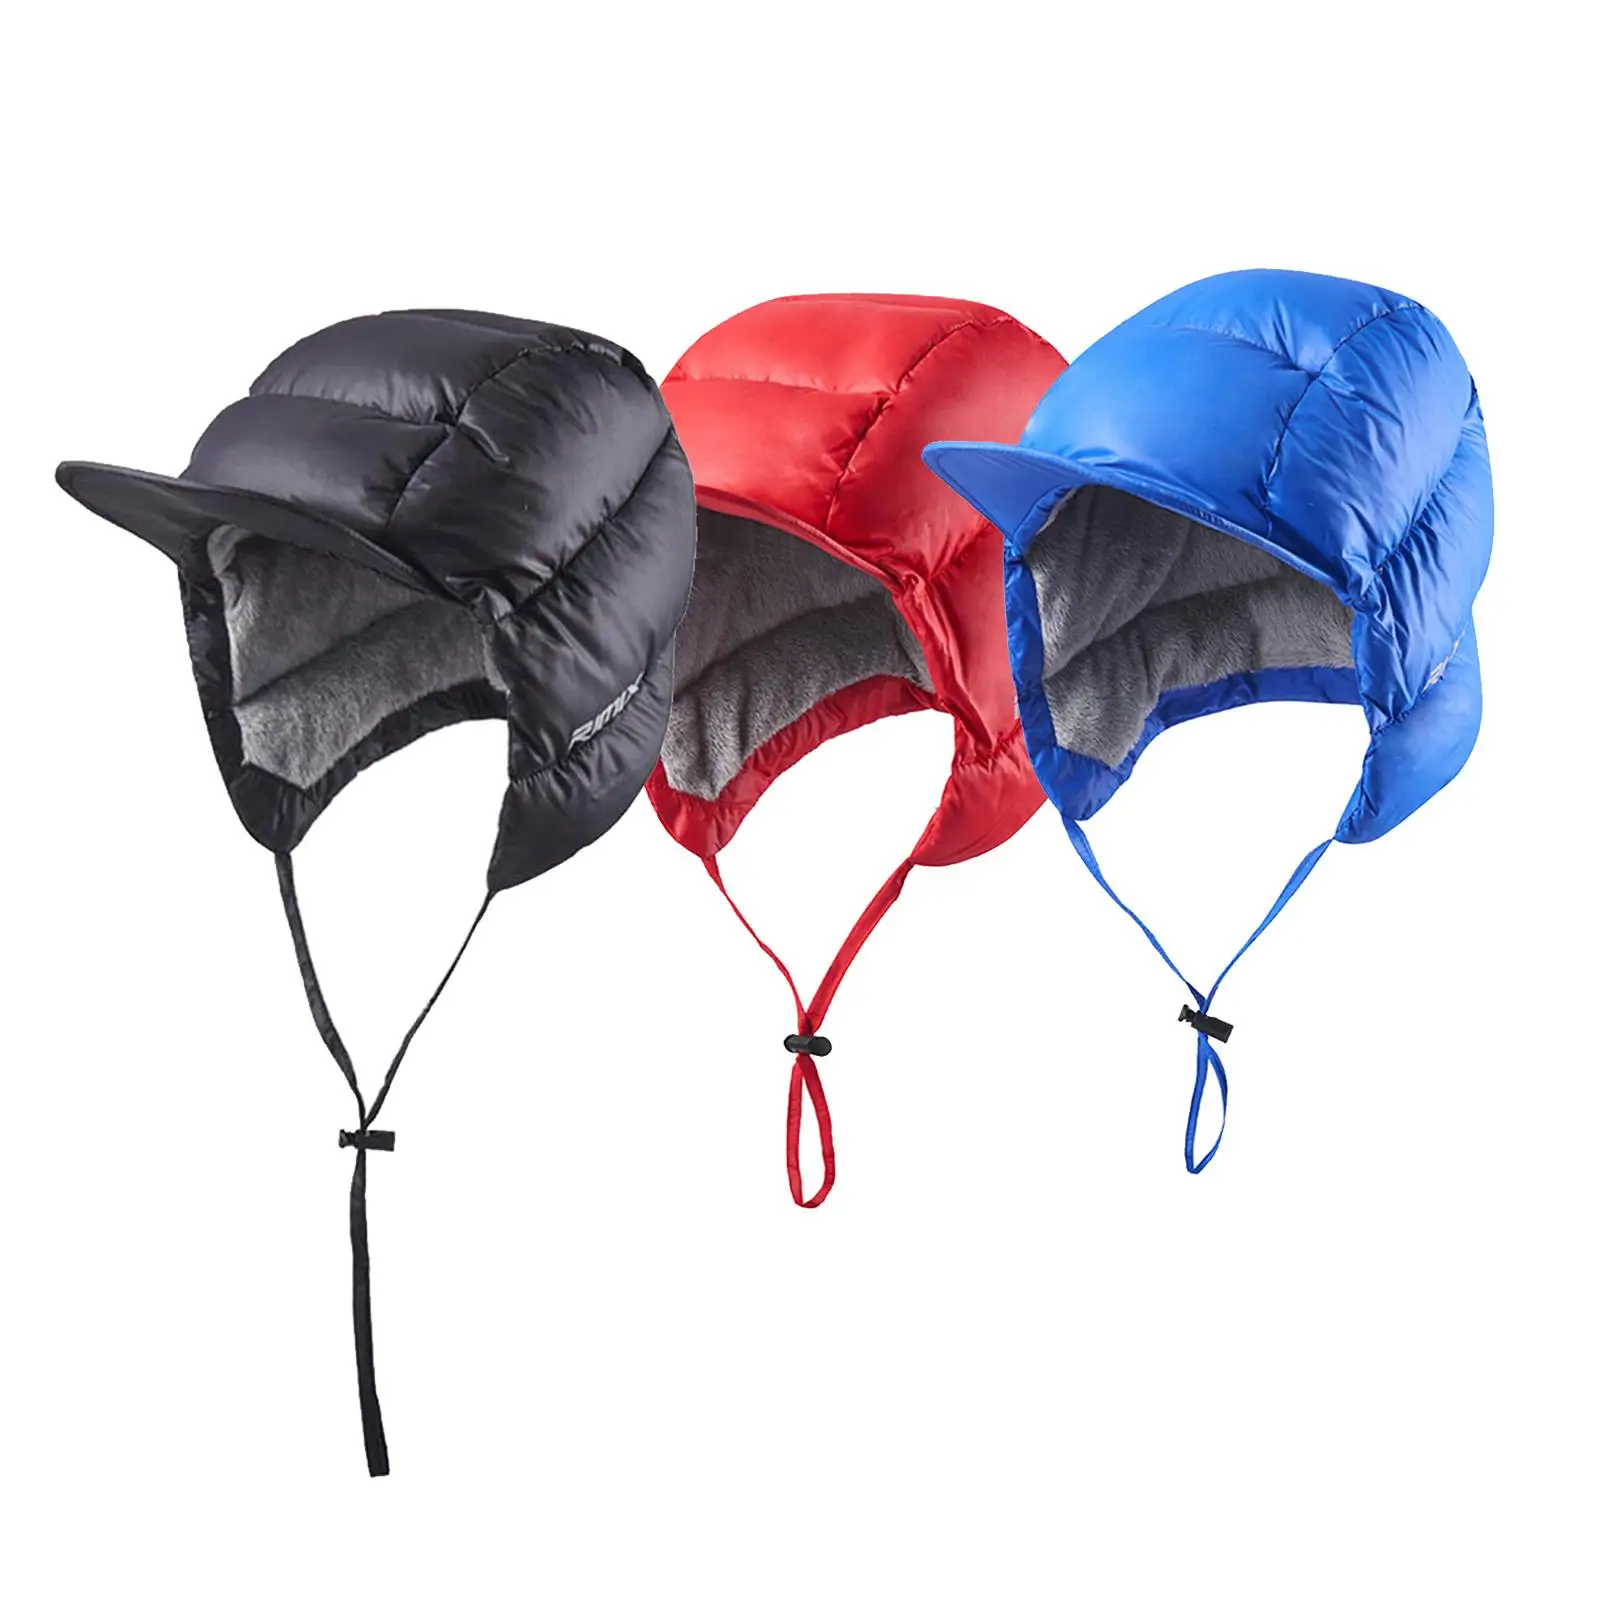 Windproof Duck Down Peaked Caps Hat Warm Ultralight for Cycling, Camping Ski Cycling Men Women Cold Weather